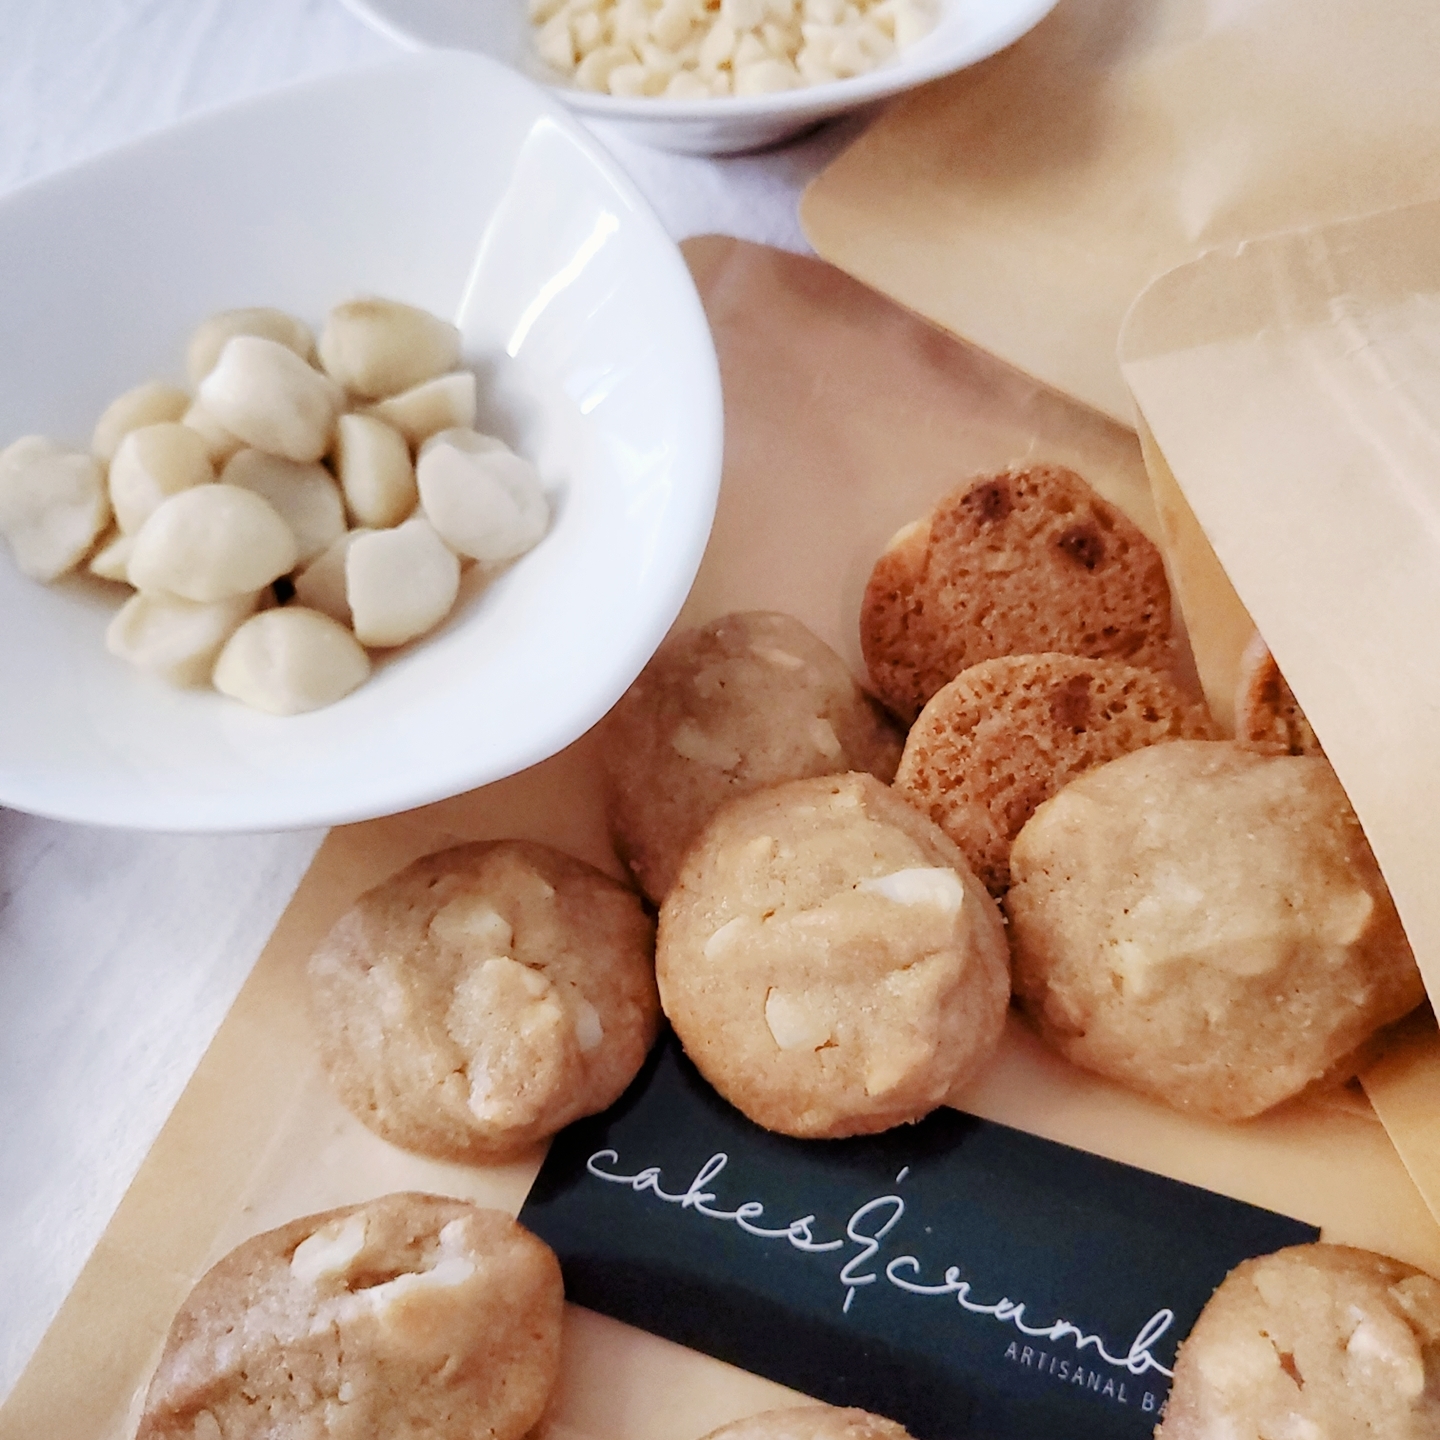 Seriously Addictive Homemade White Chocolate Chip & Macadamia Nuts Cookies In Bag